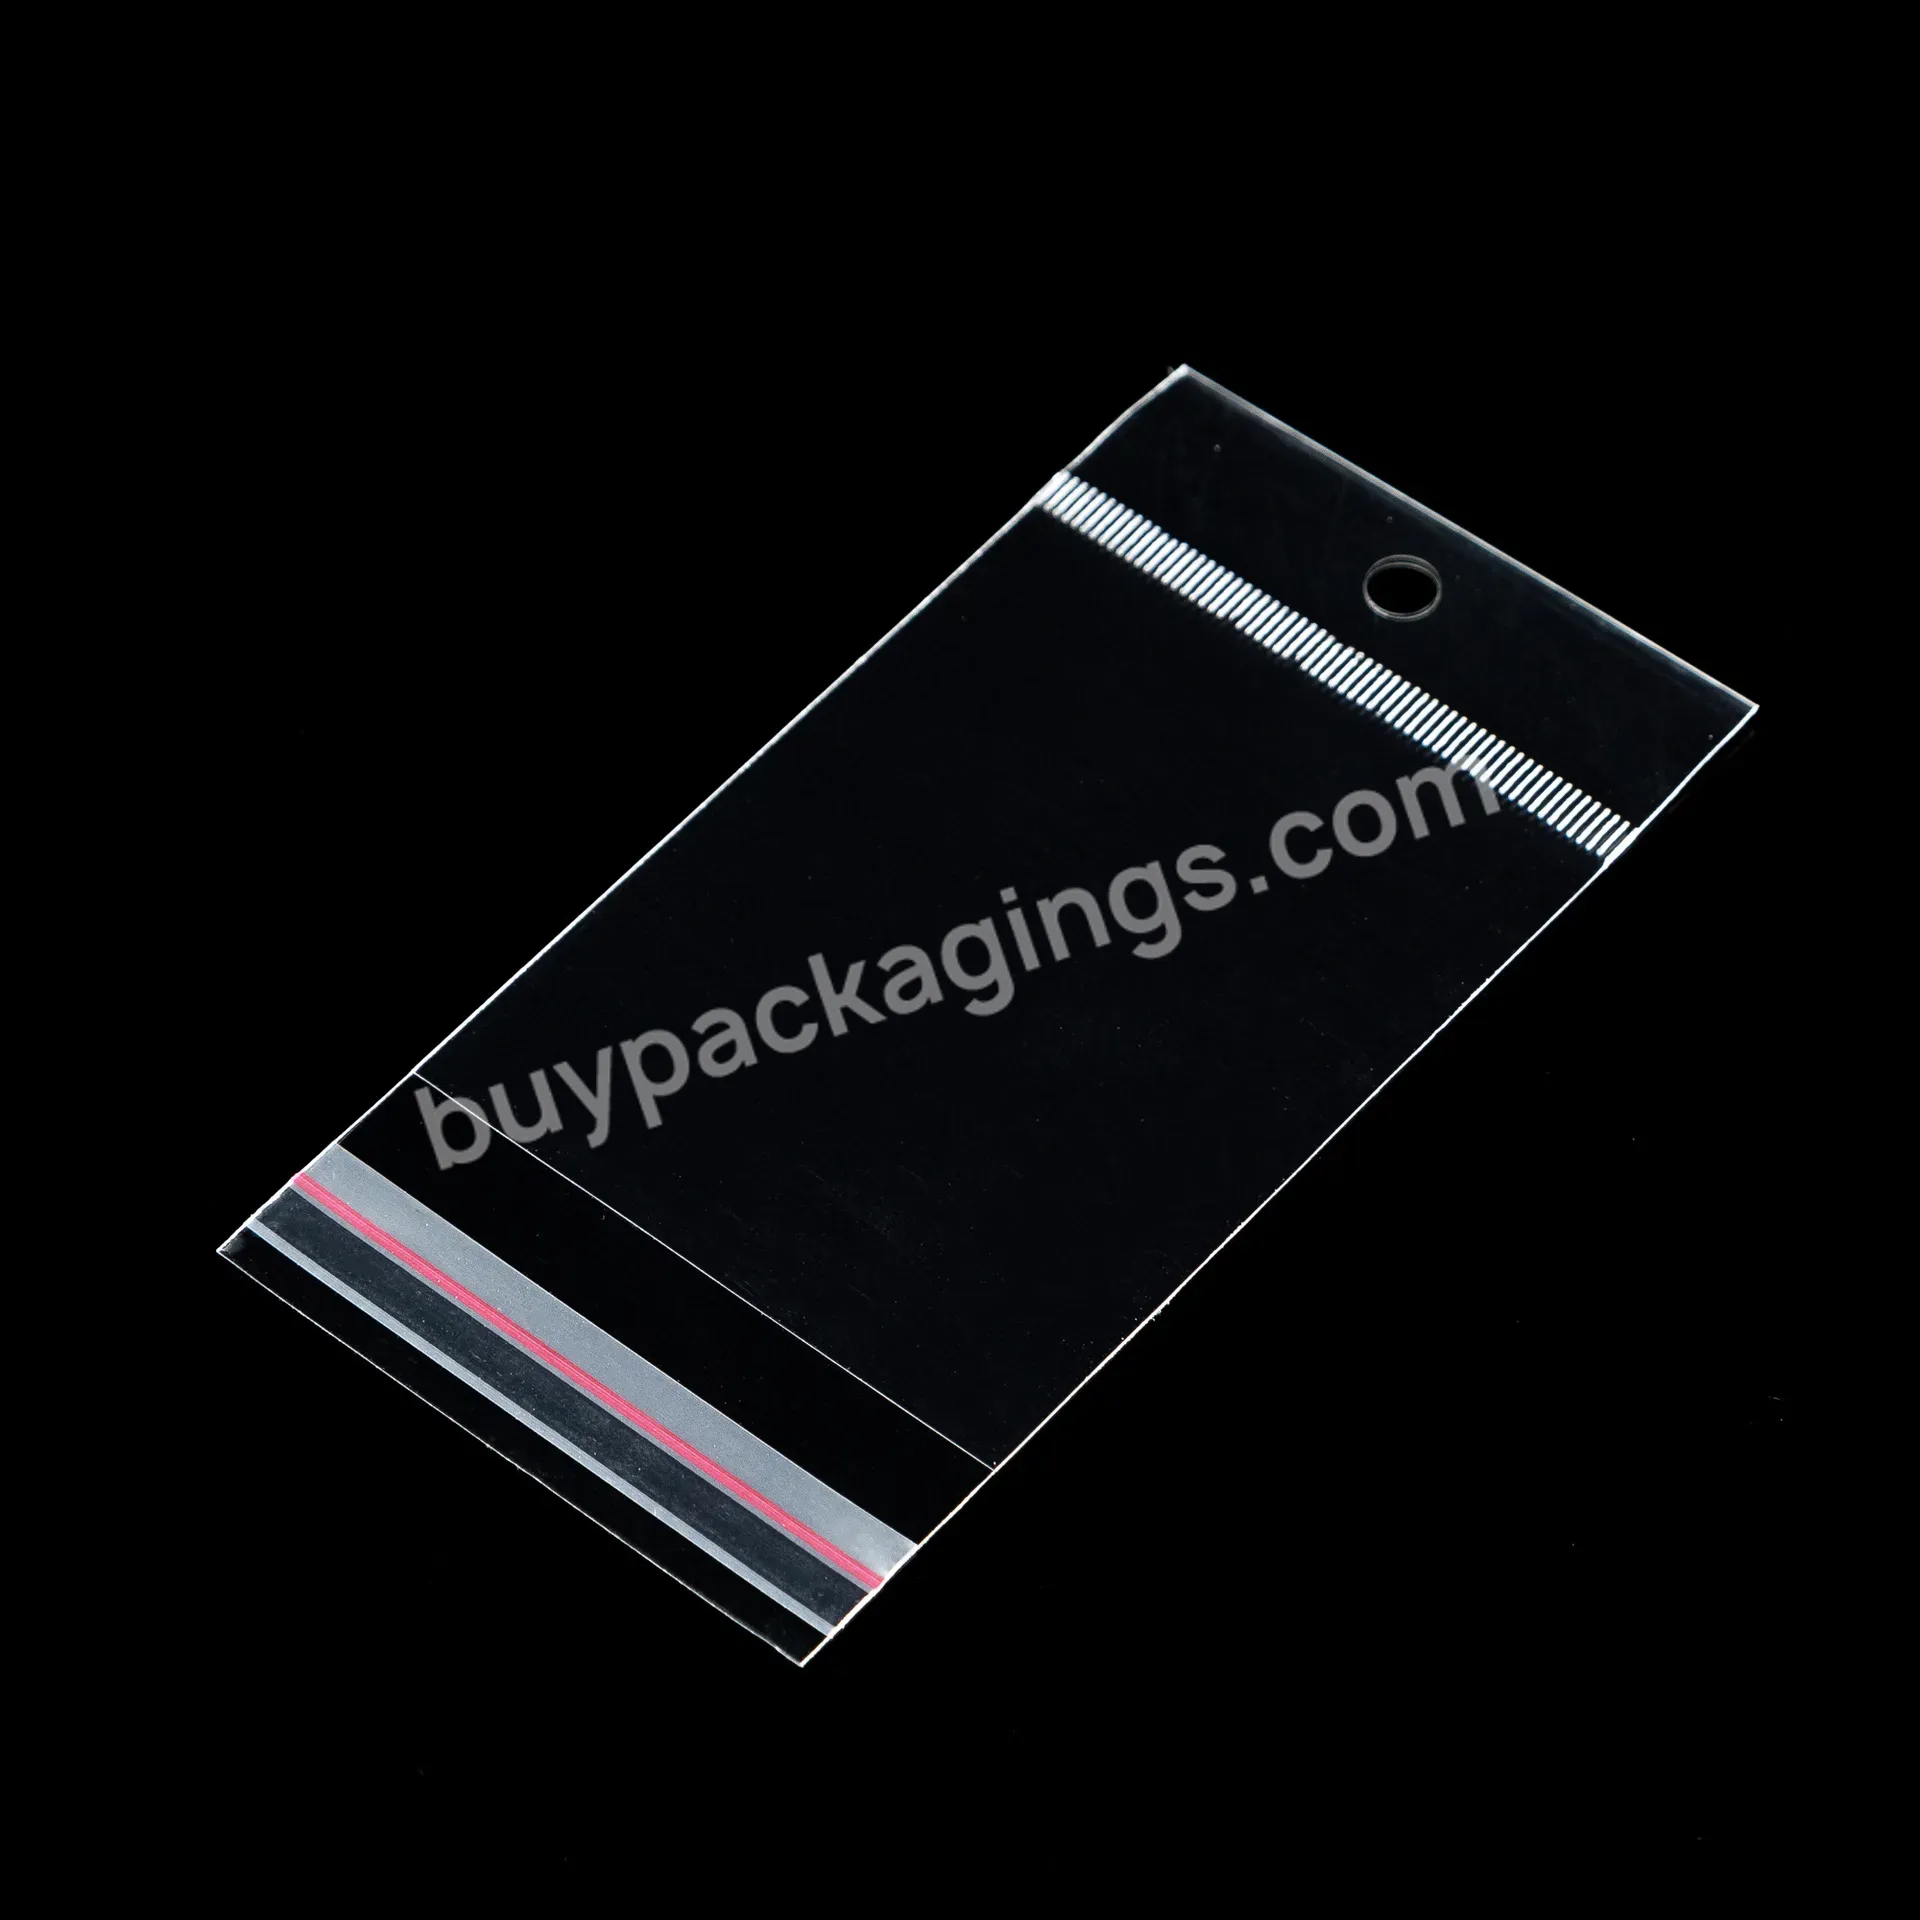 Custom Different Size Clear Waterproof Transparent Opp Bag Self-adhesive Plastic Poly Bag